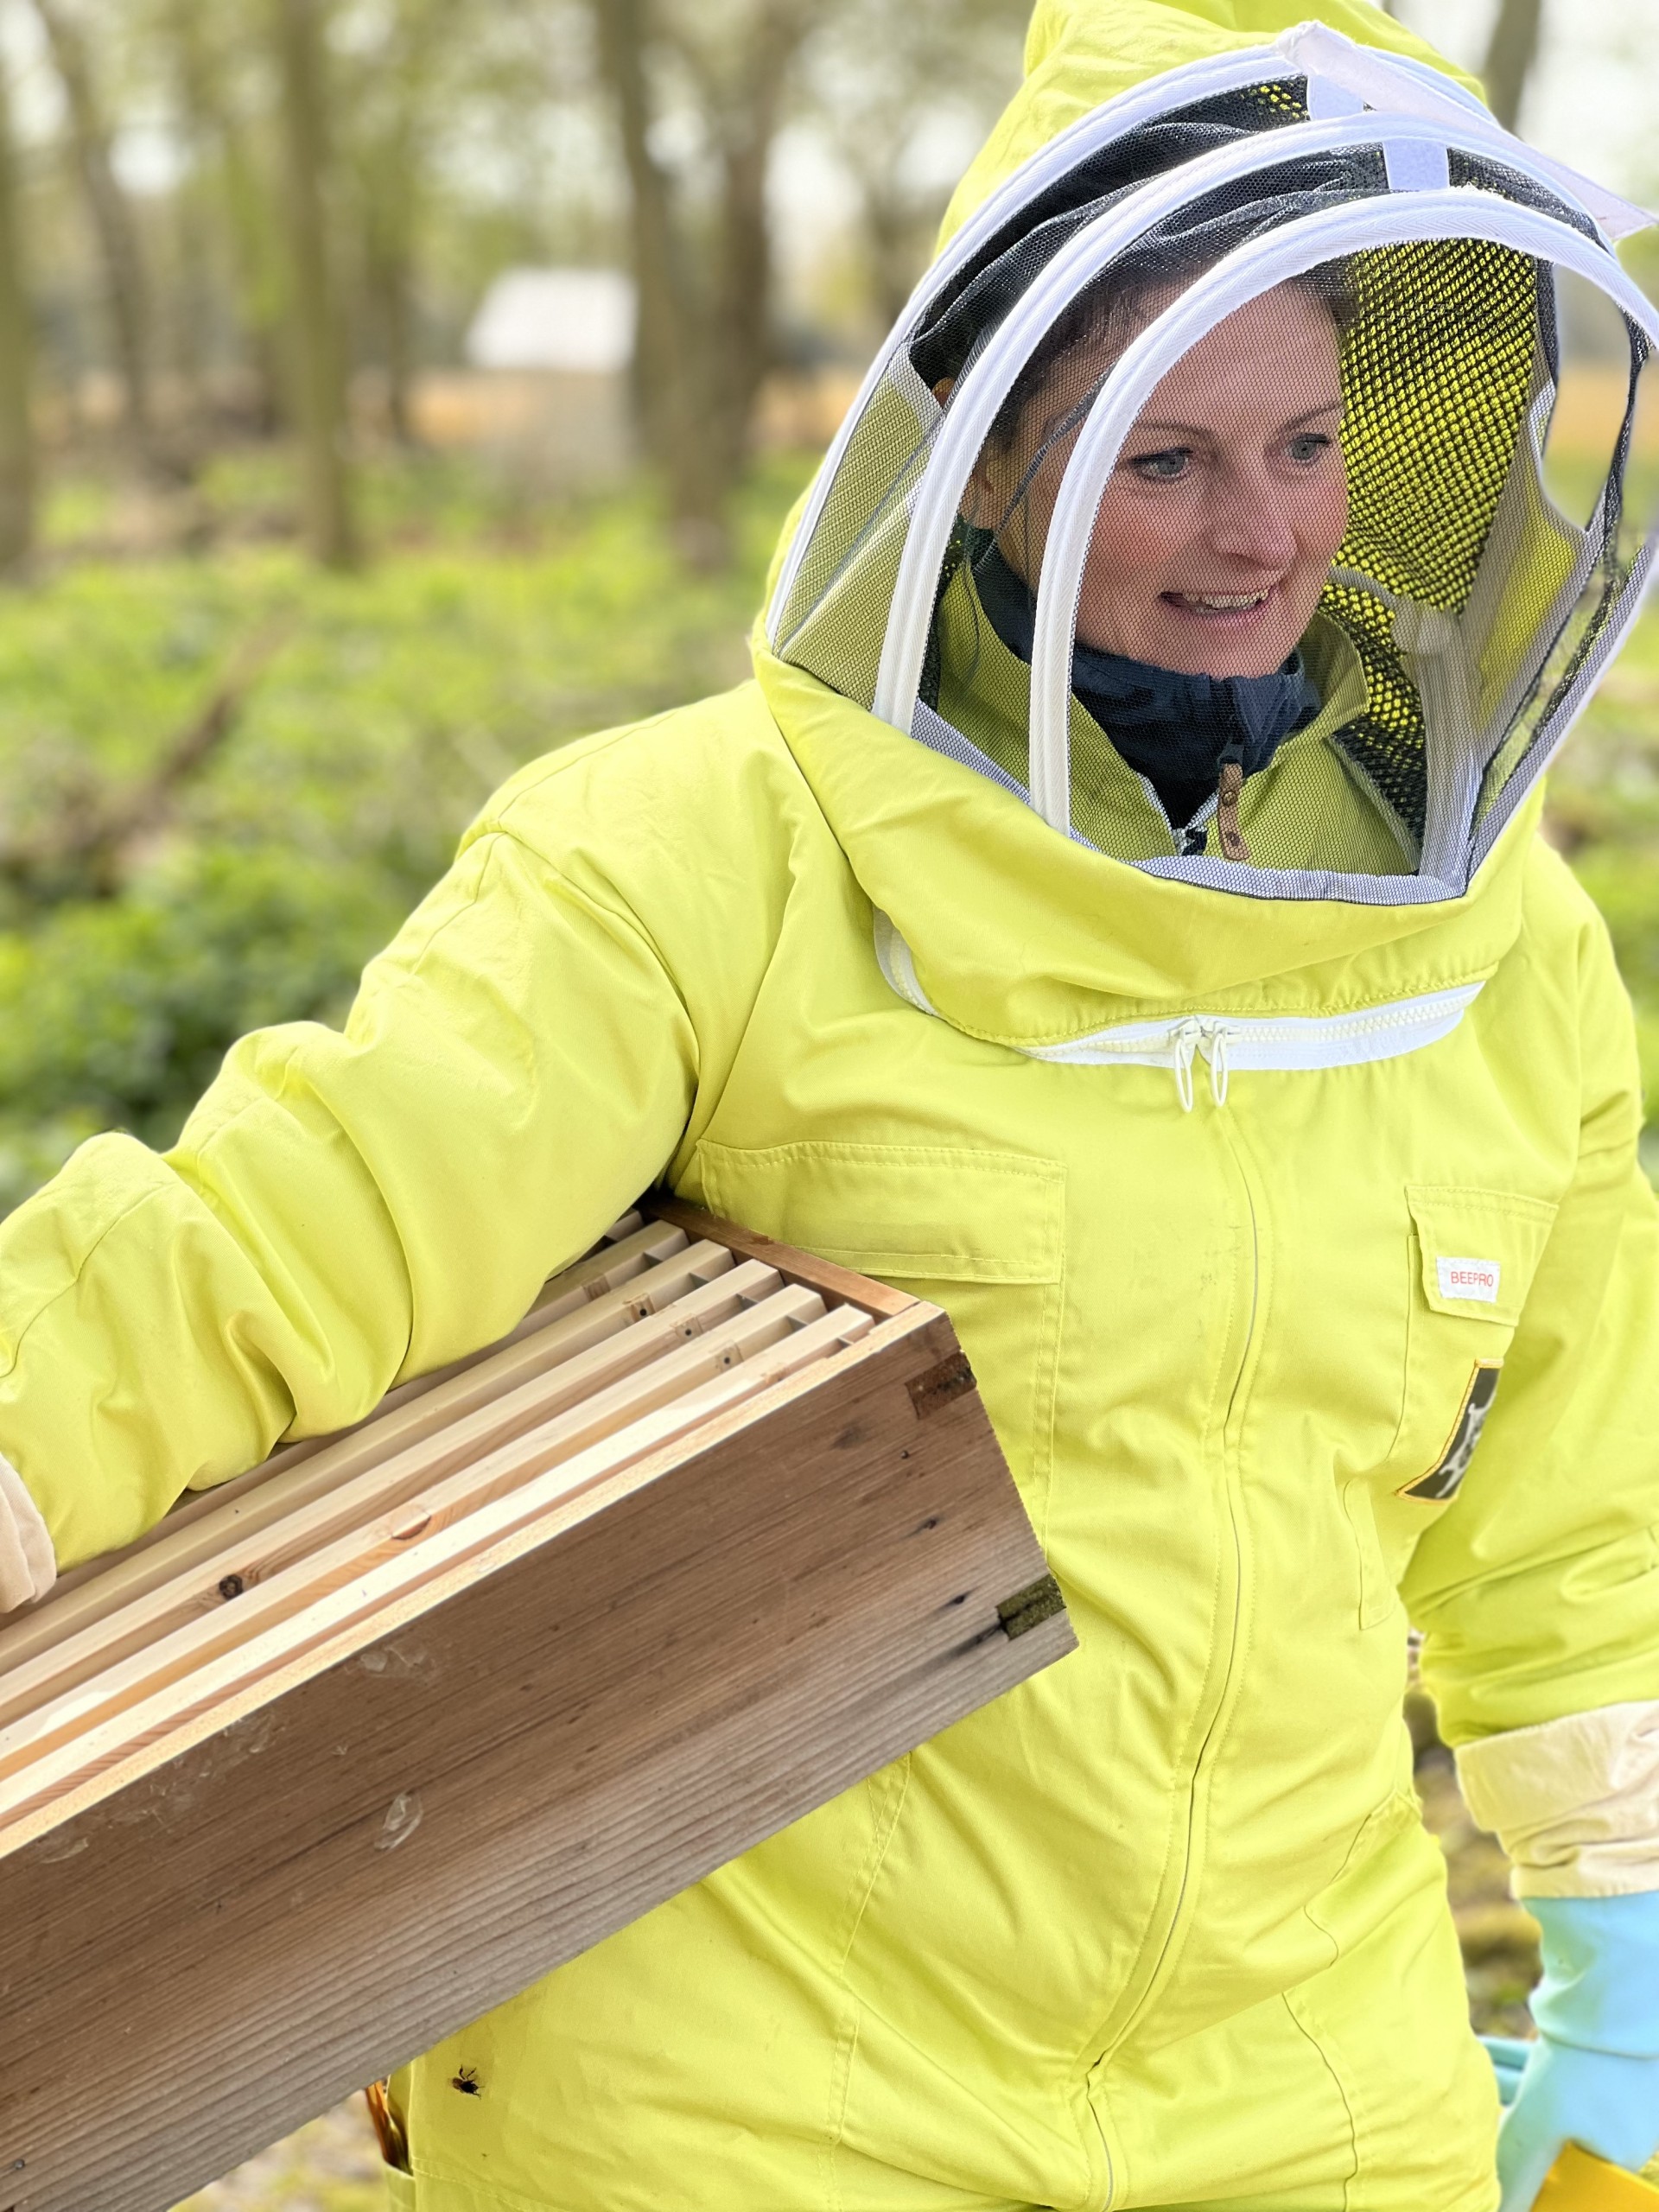 Our NOMAD Community Projects bee keeper in her bee suit.